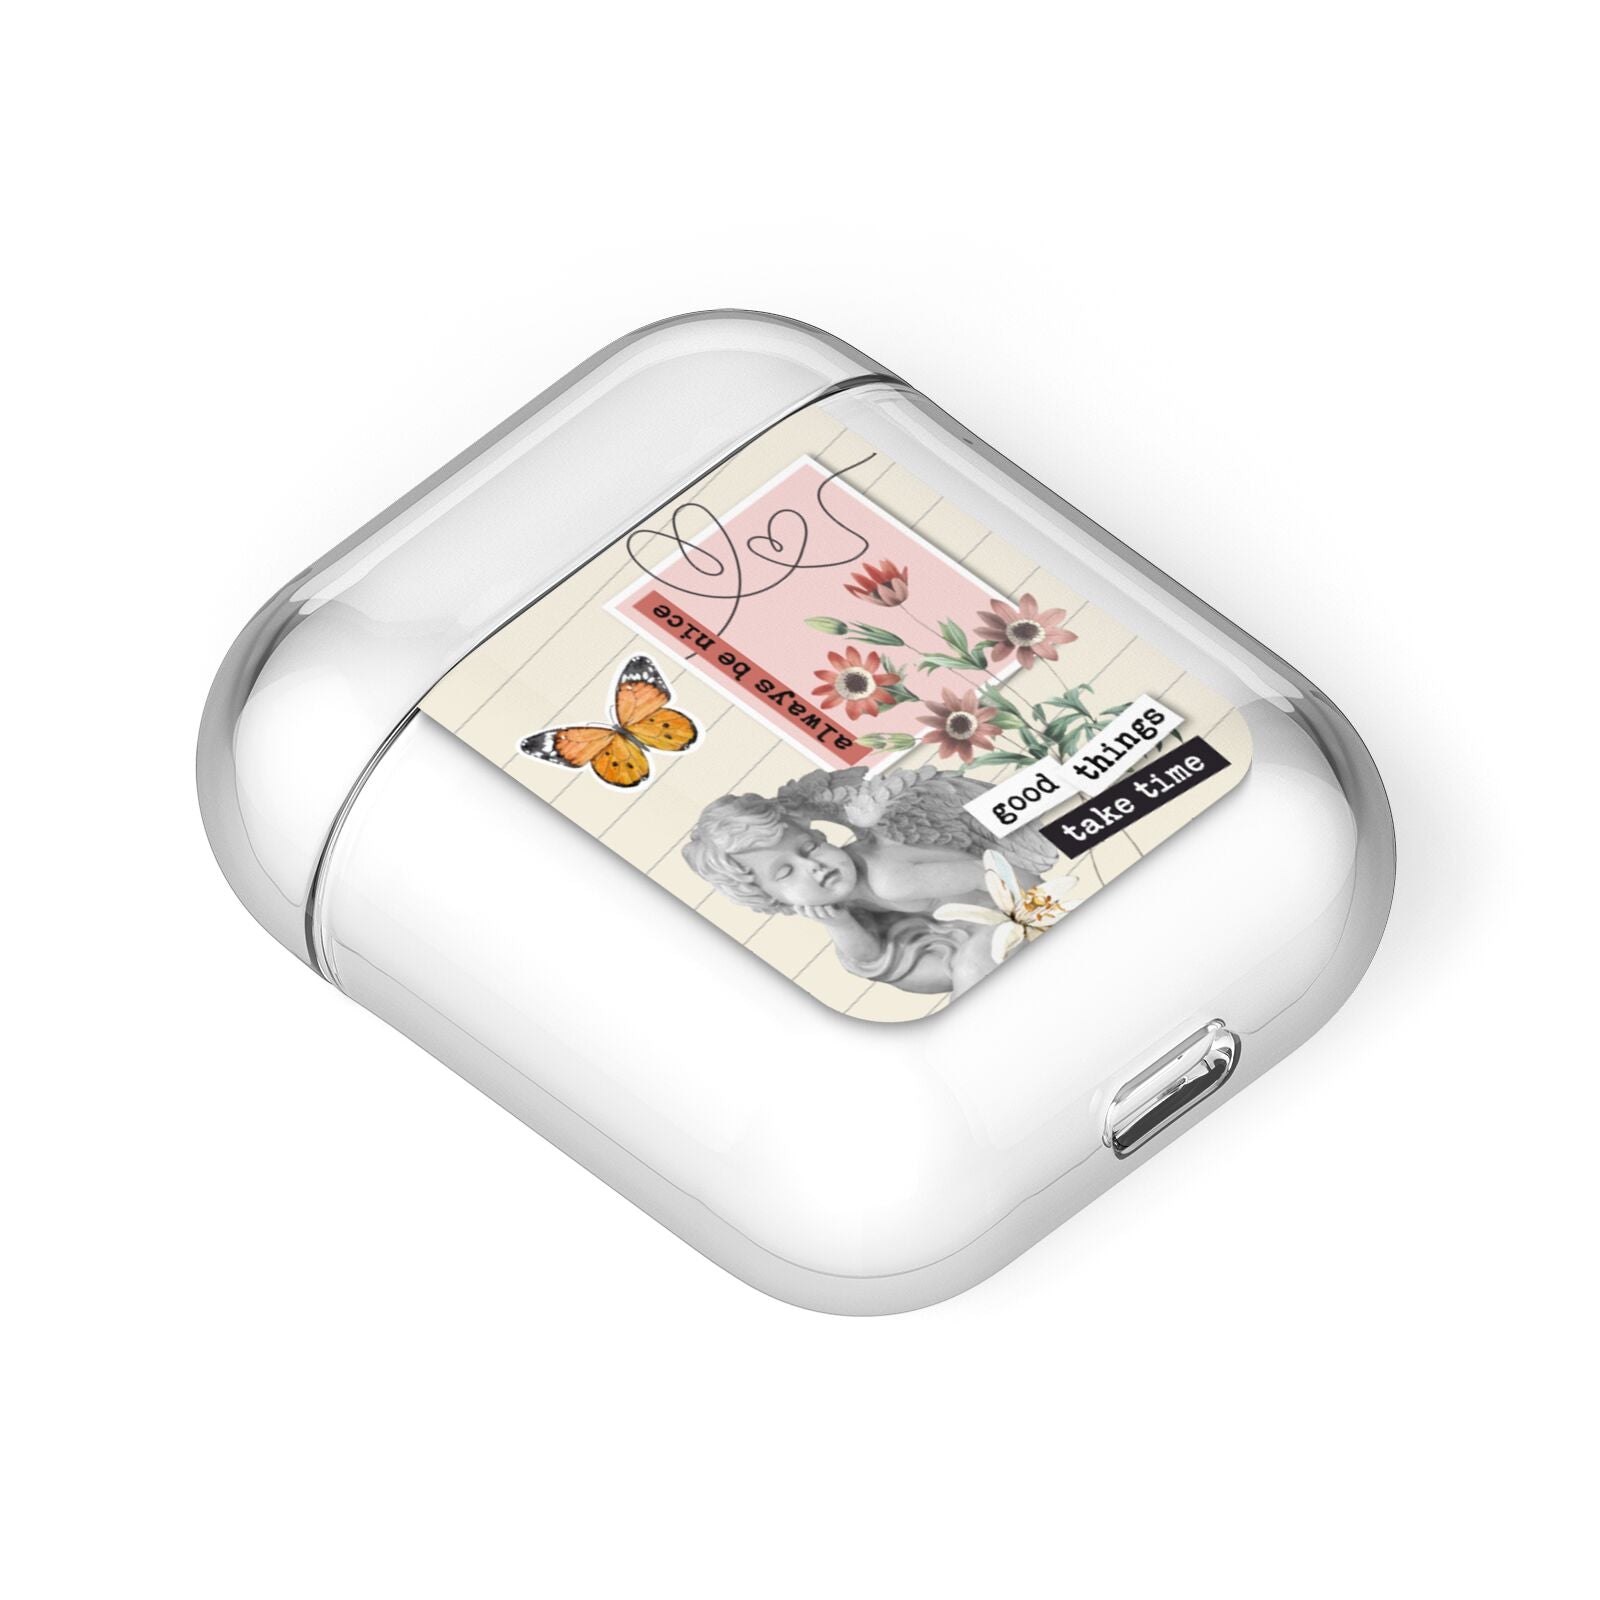 Vintage Love Collage AirPods Case Laid Flat